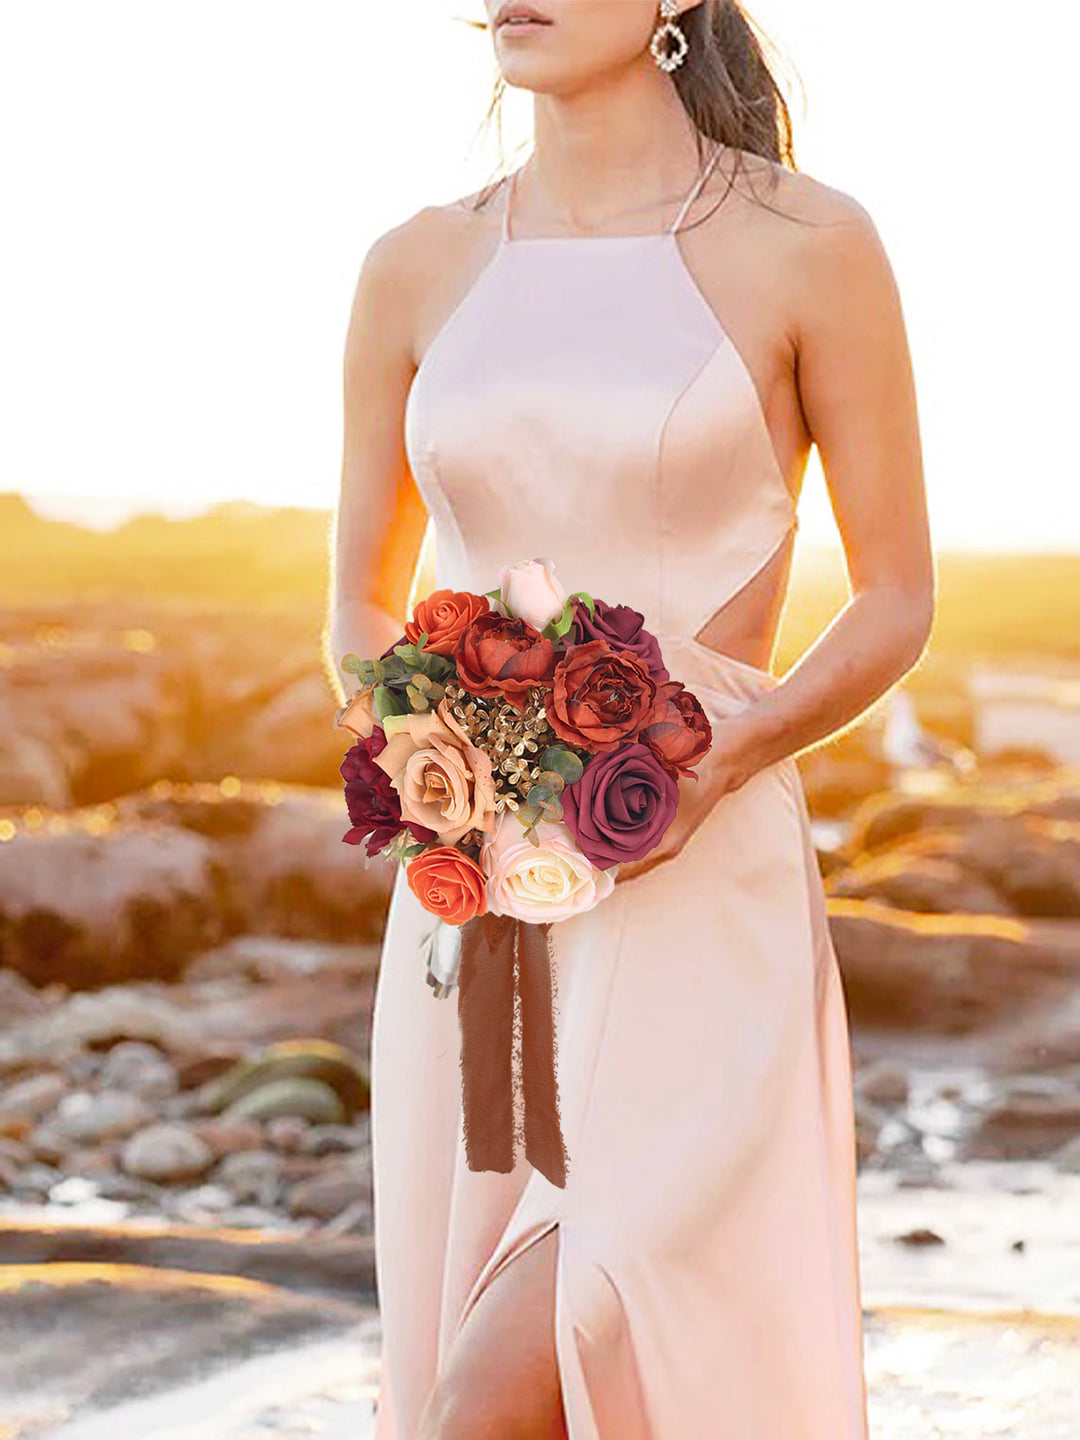 7.8 inch wide Rounded Terracotta Bridesmaid Bouquet - Rinlong Flower